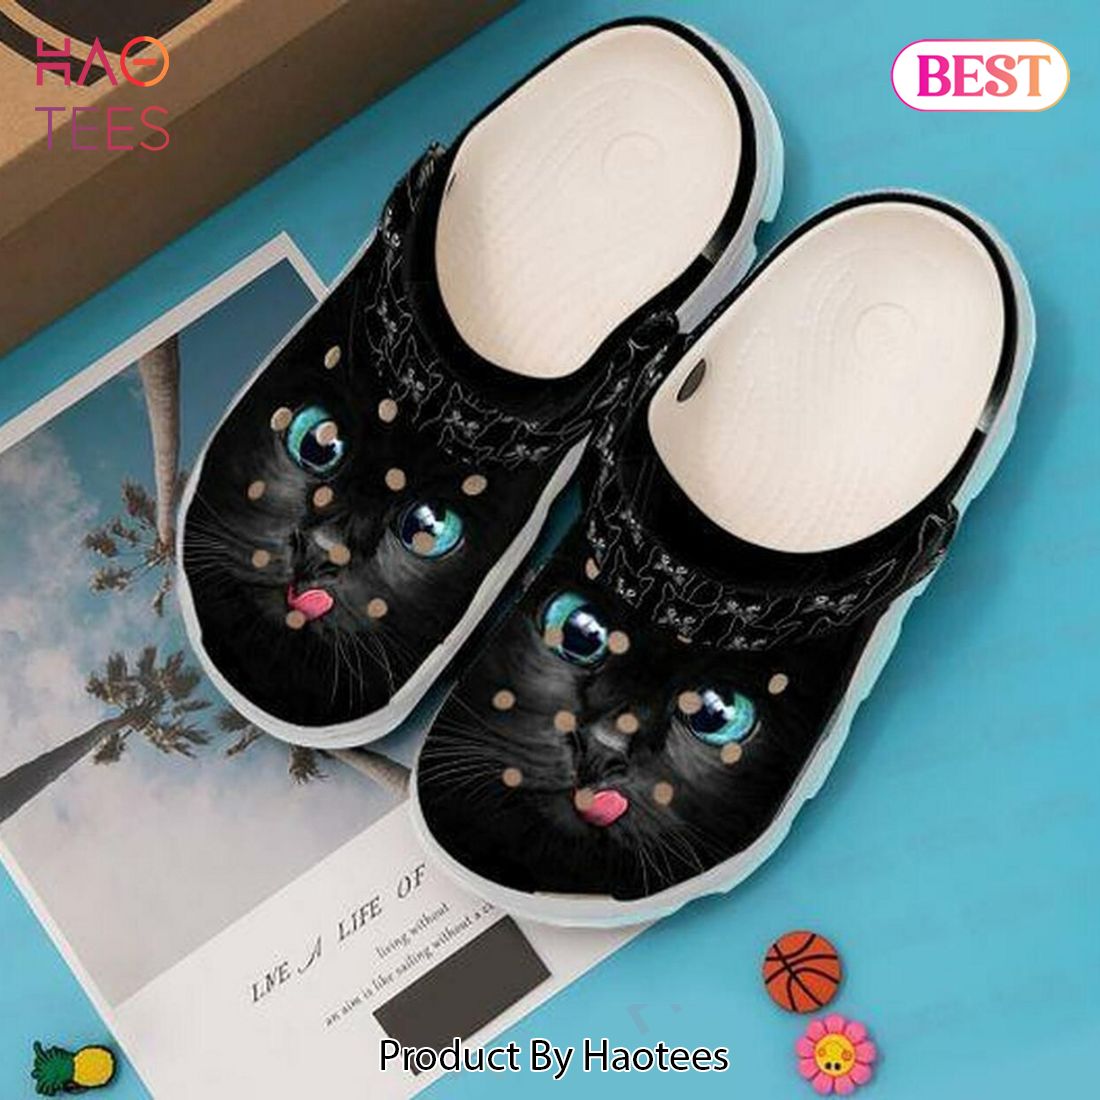 stang blad Vær modløs Cute Black Cat Personalized 202 Gift For Lover Rubber Crocs Clog Shoes  Comfy Footwear